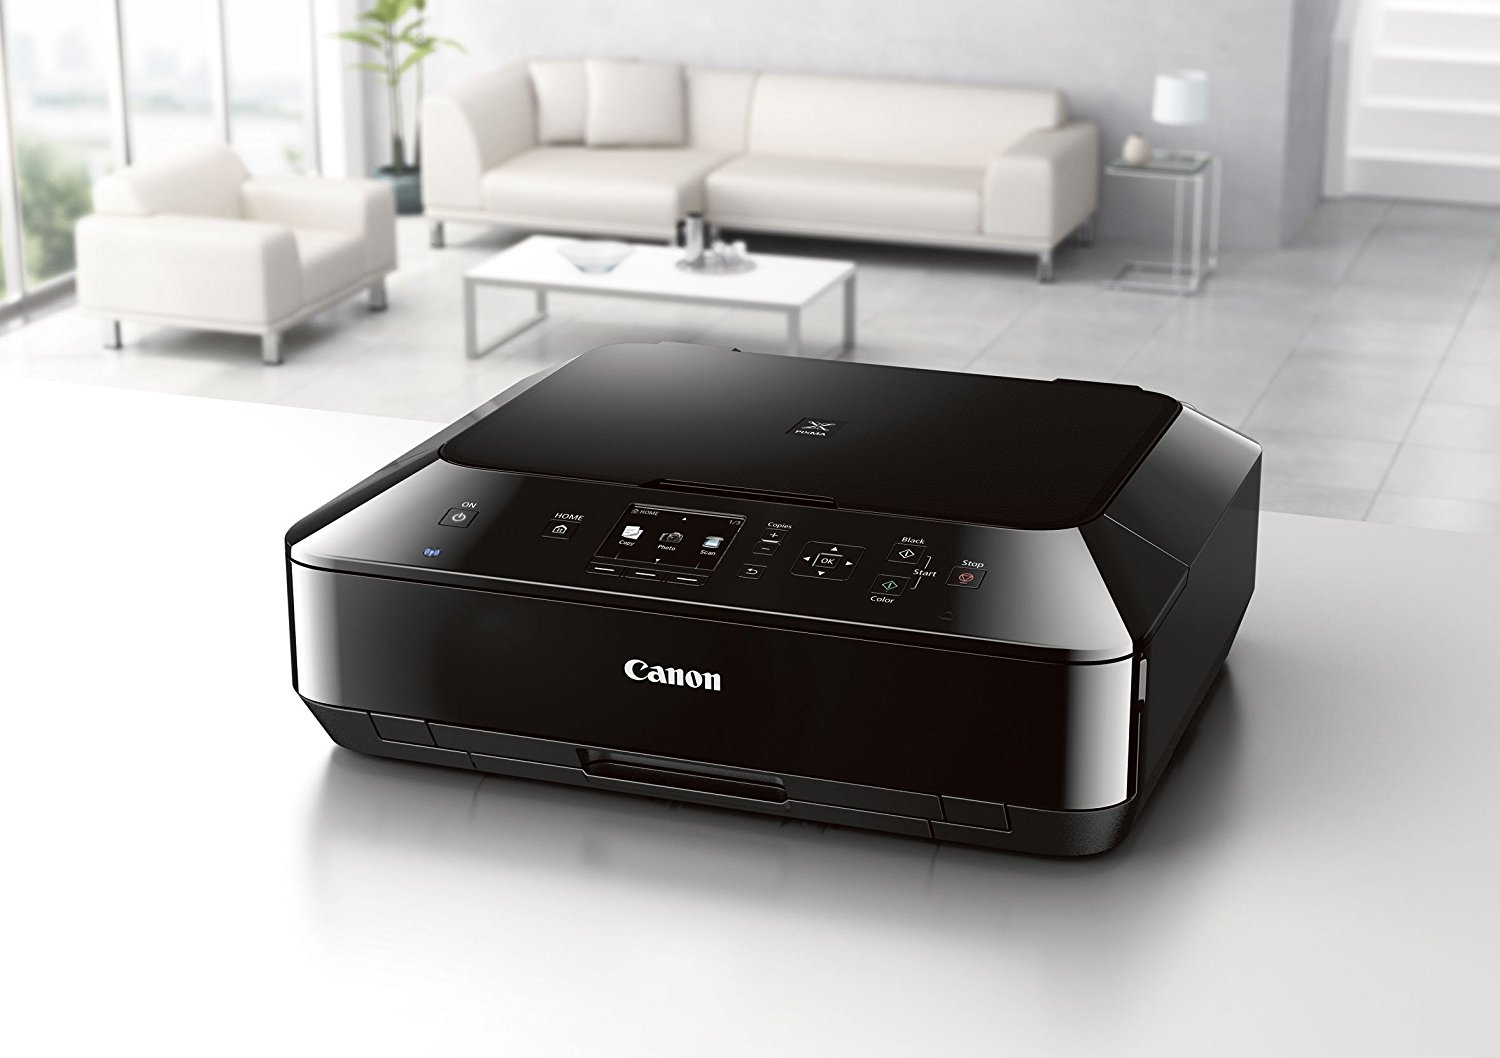 Canon Pixma Mg5420 Wireless Color Photo Printer Discontinued By Manufacturer N6 Free Image 3267